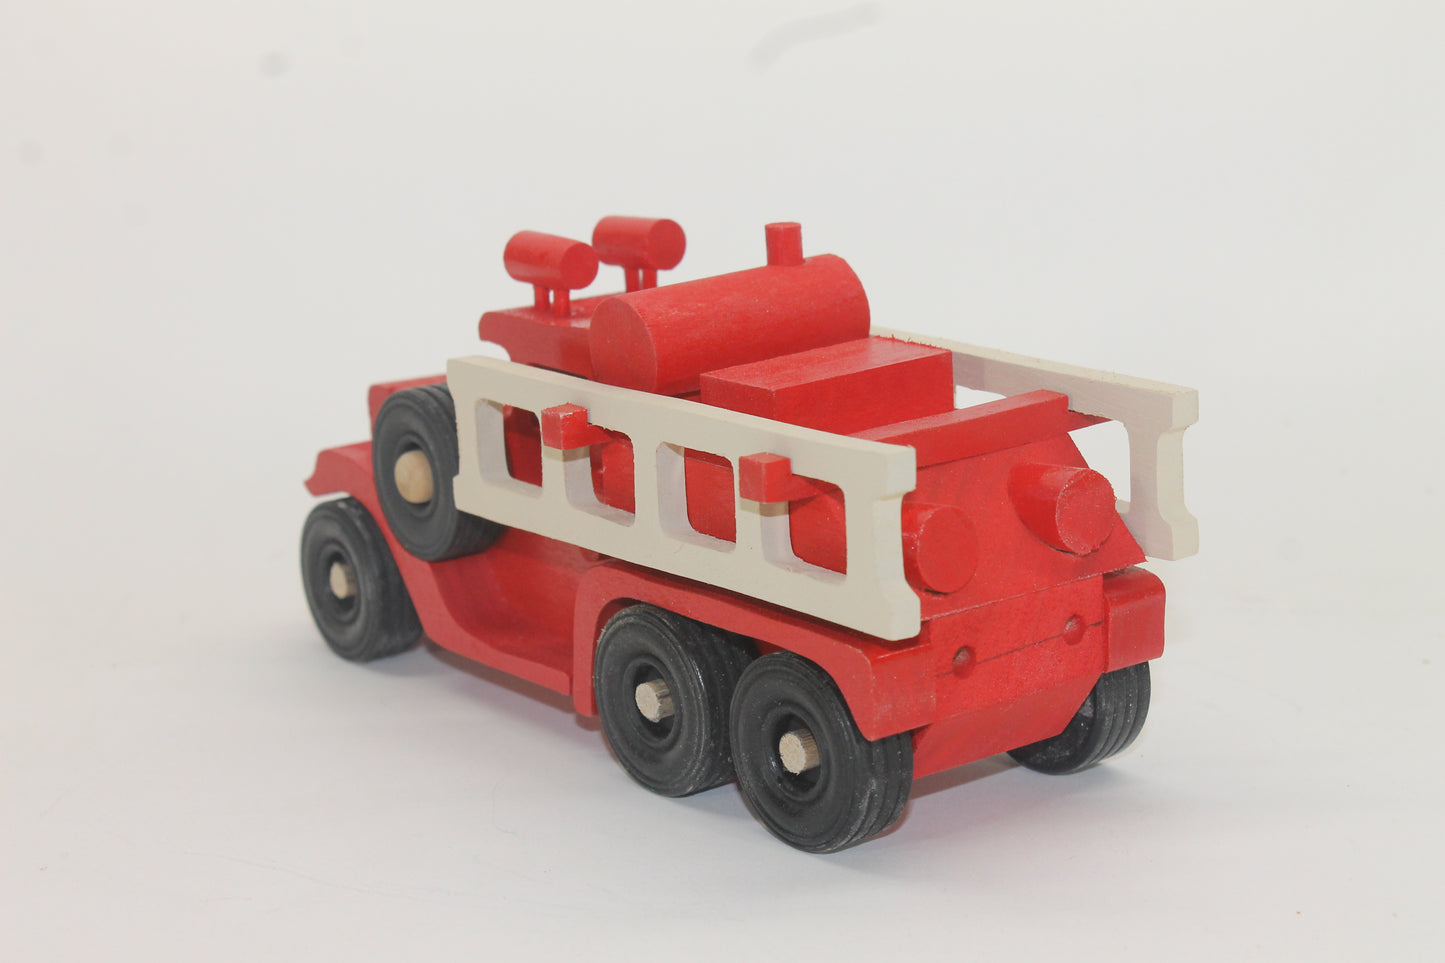 1920's style fire truck